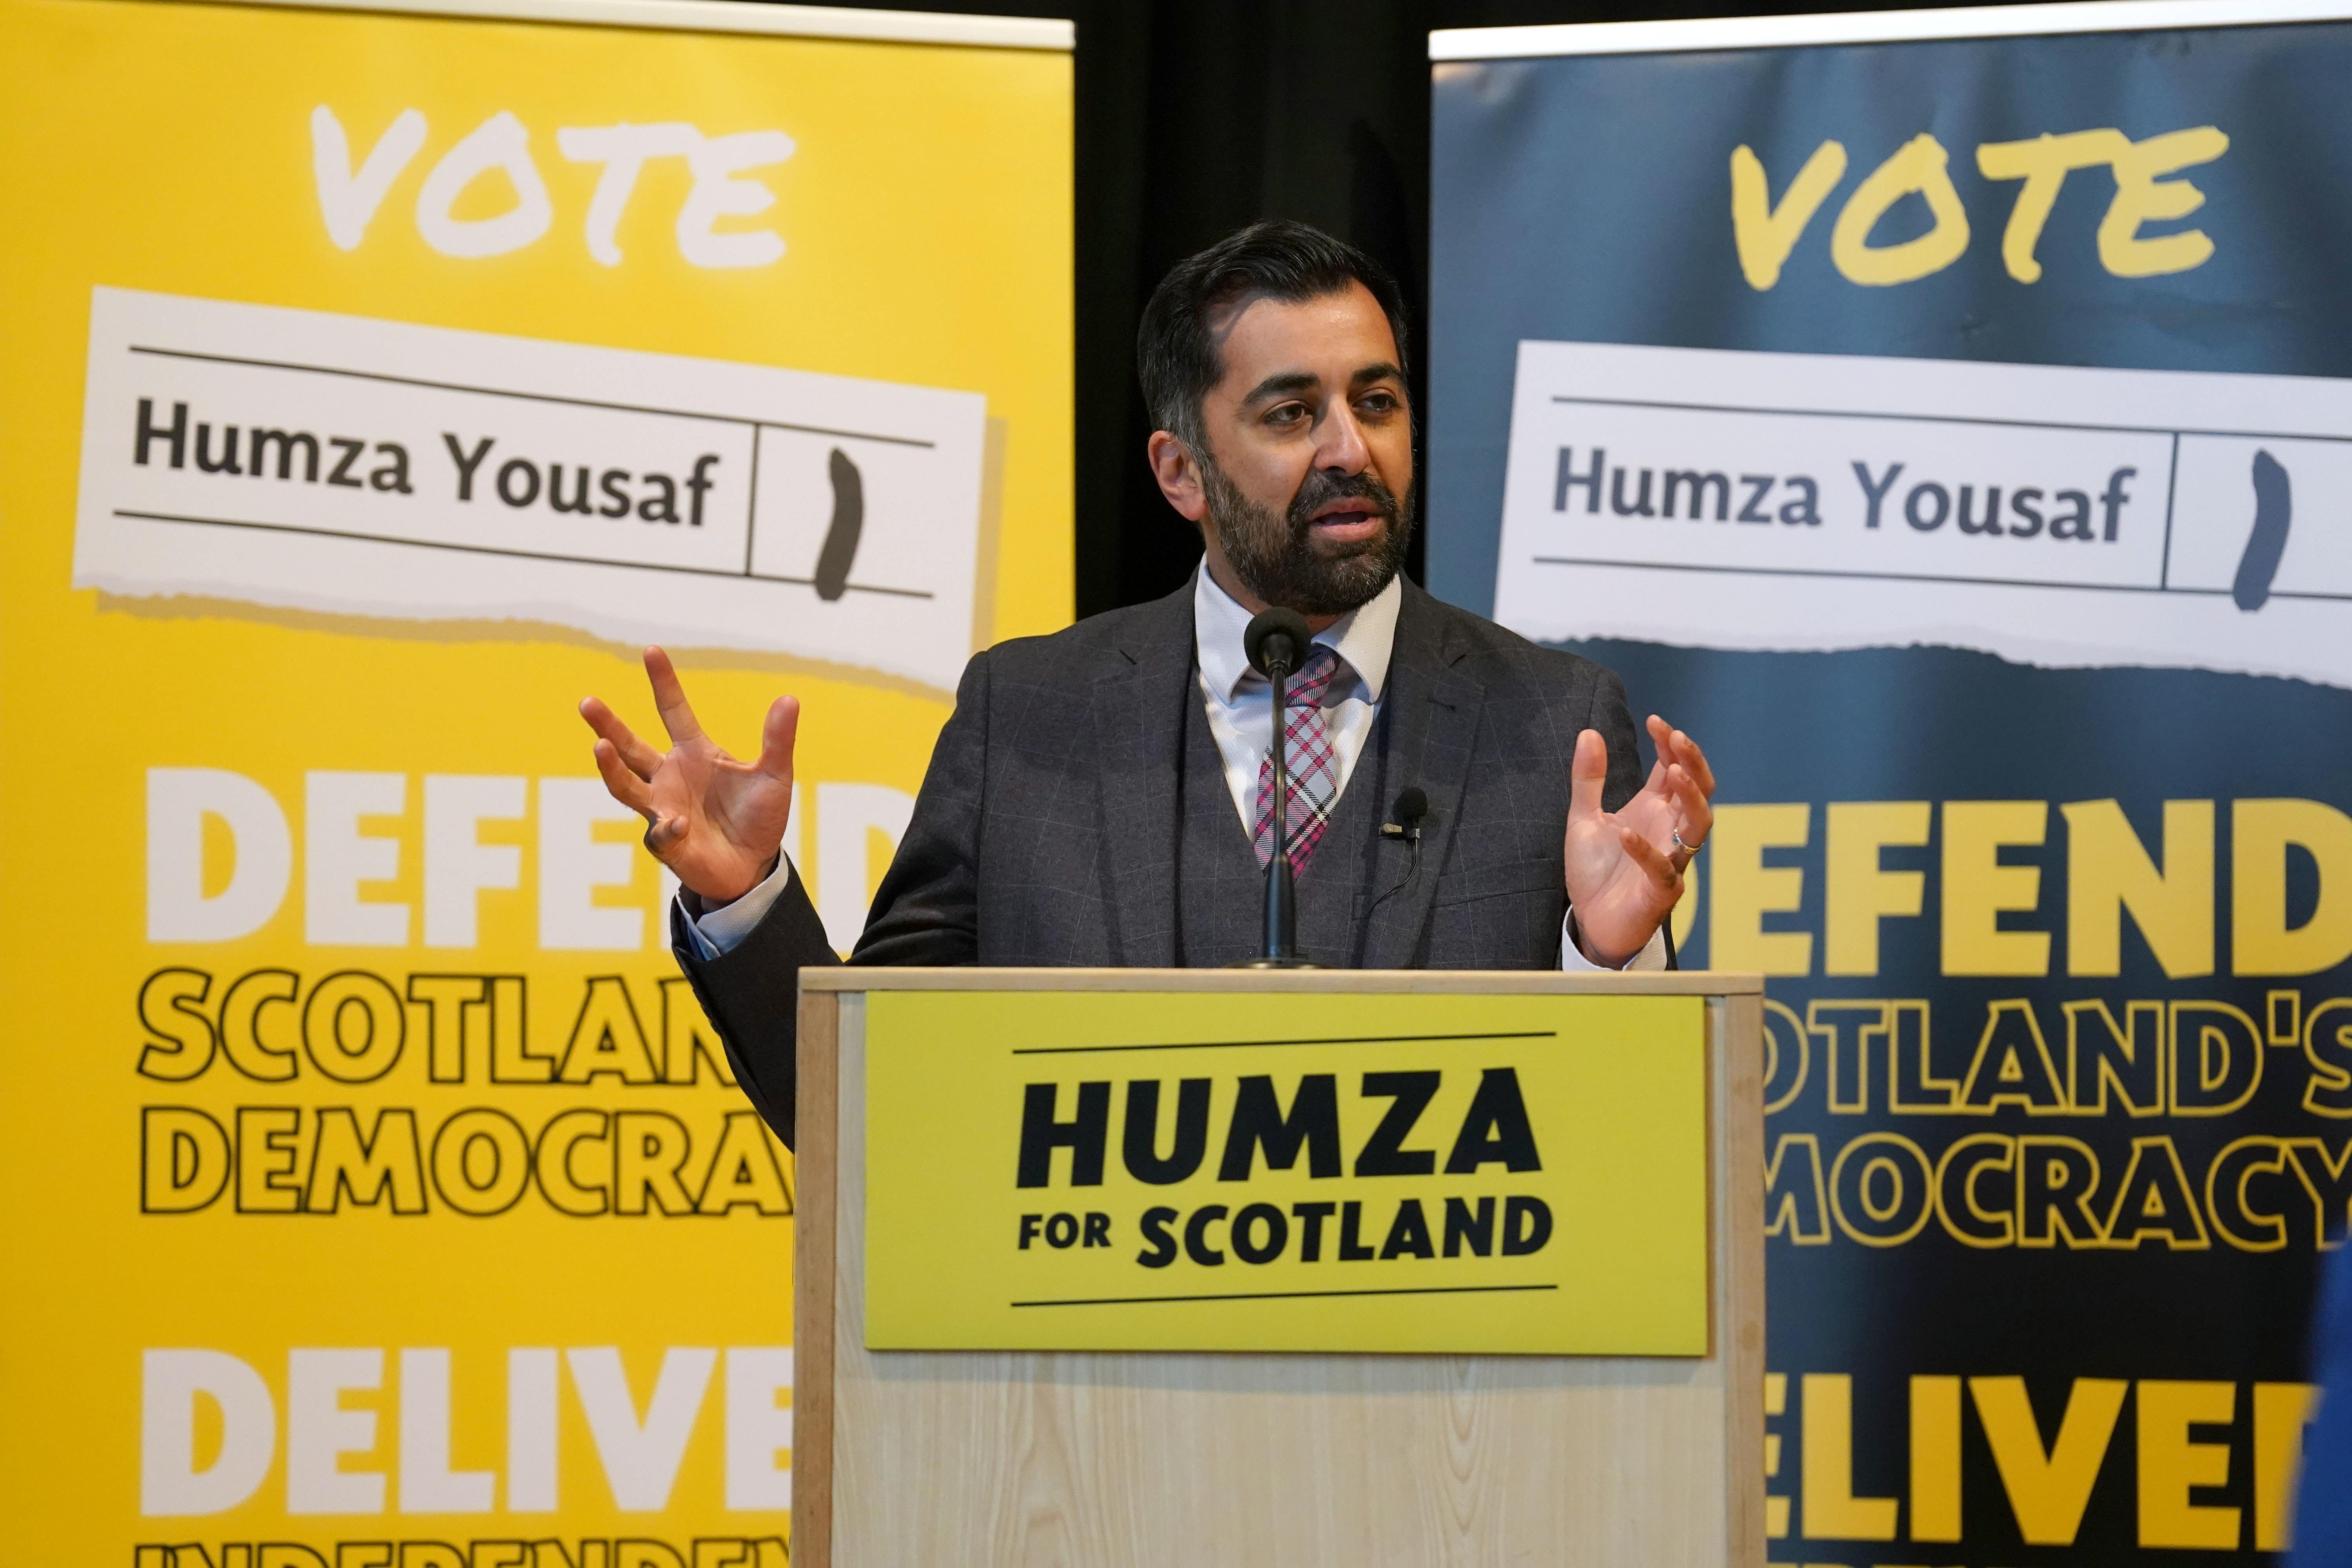 SNP leadership candidate Humza Yousaf delivers a speech on his vision for an independent Scotland (Andrew Milligan/PA)